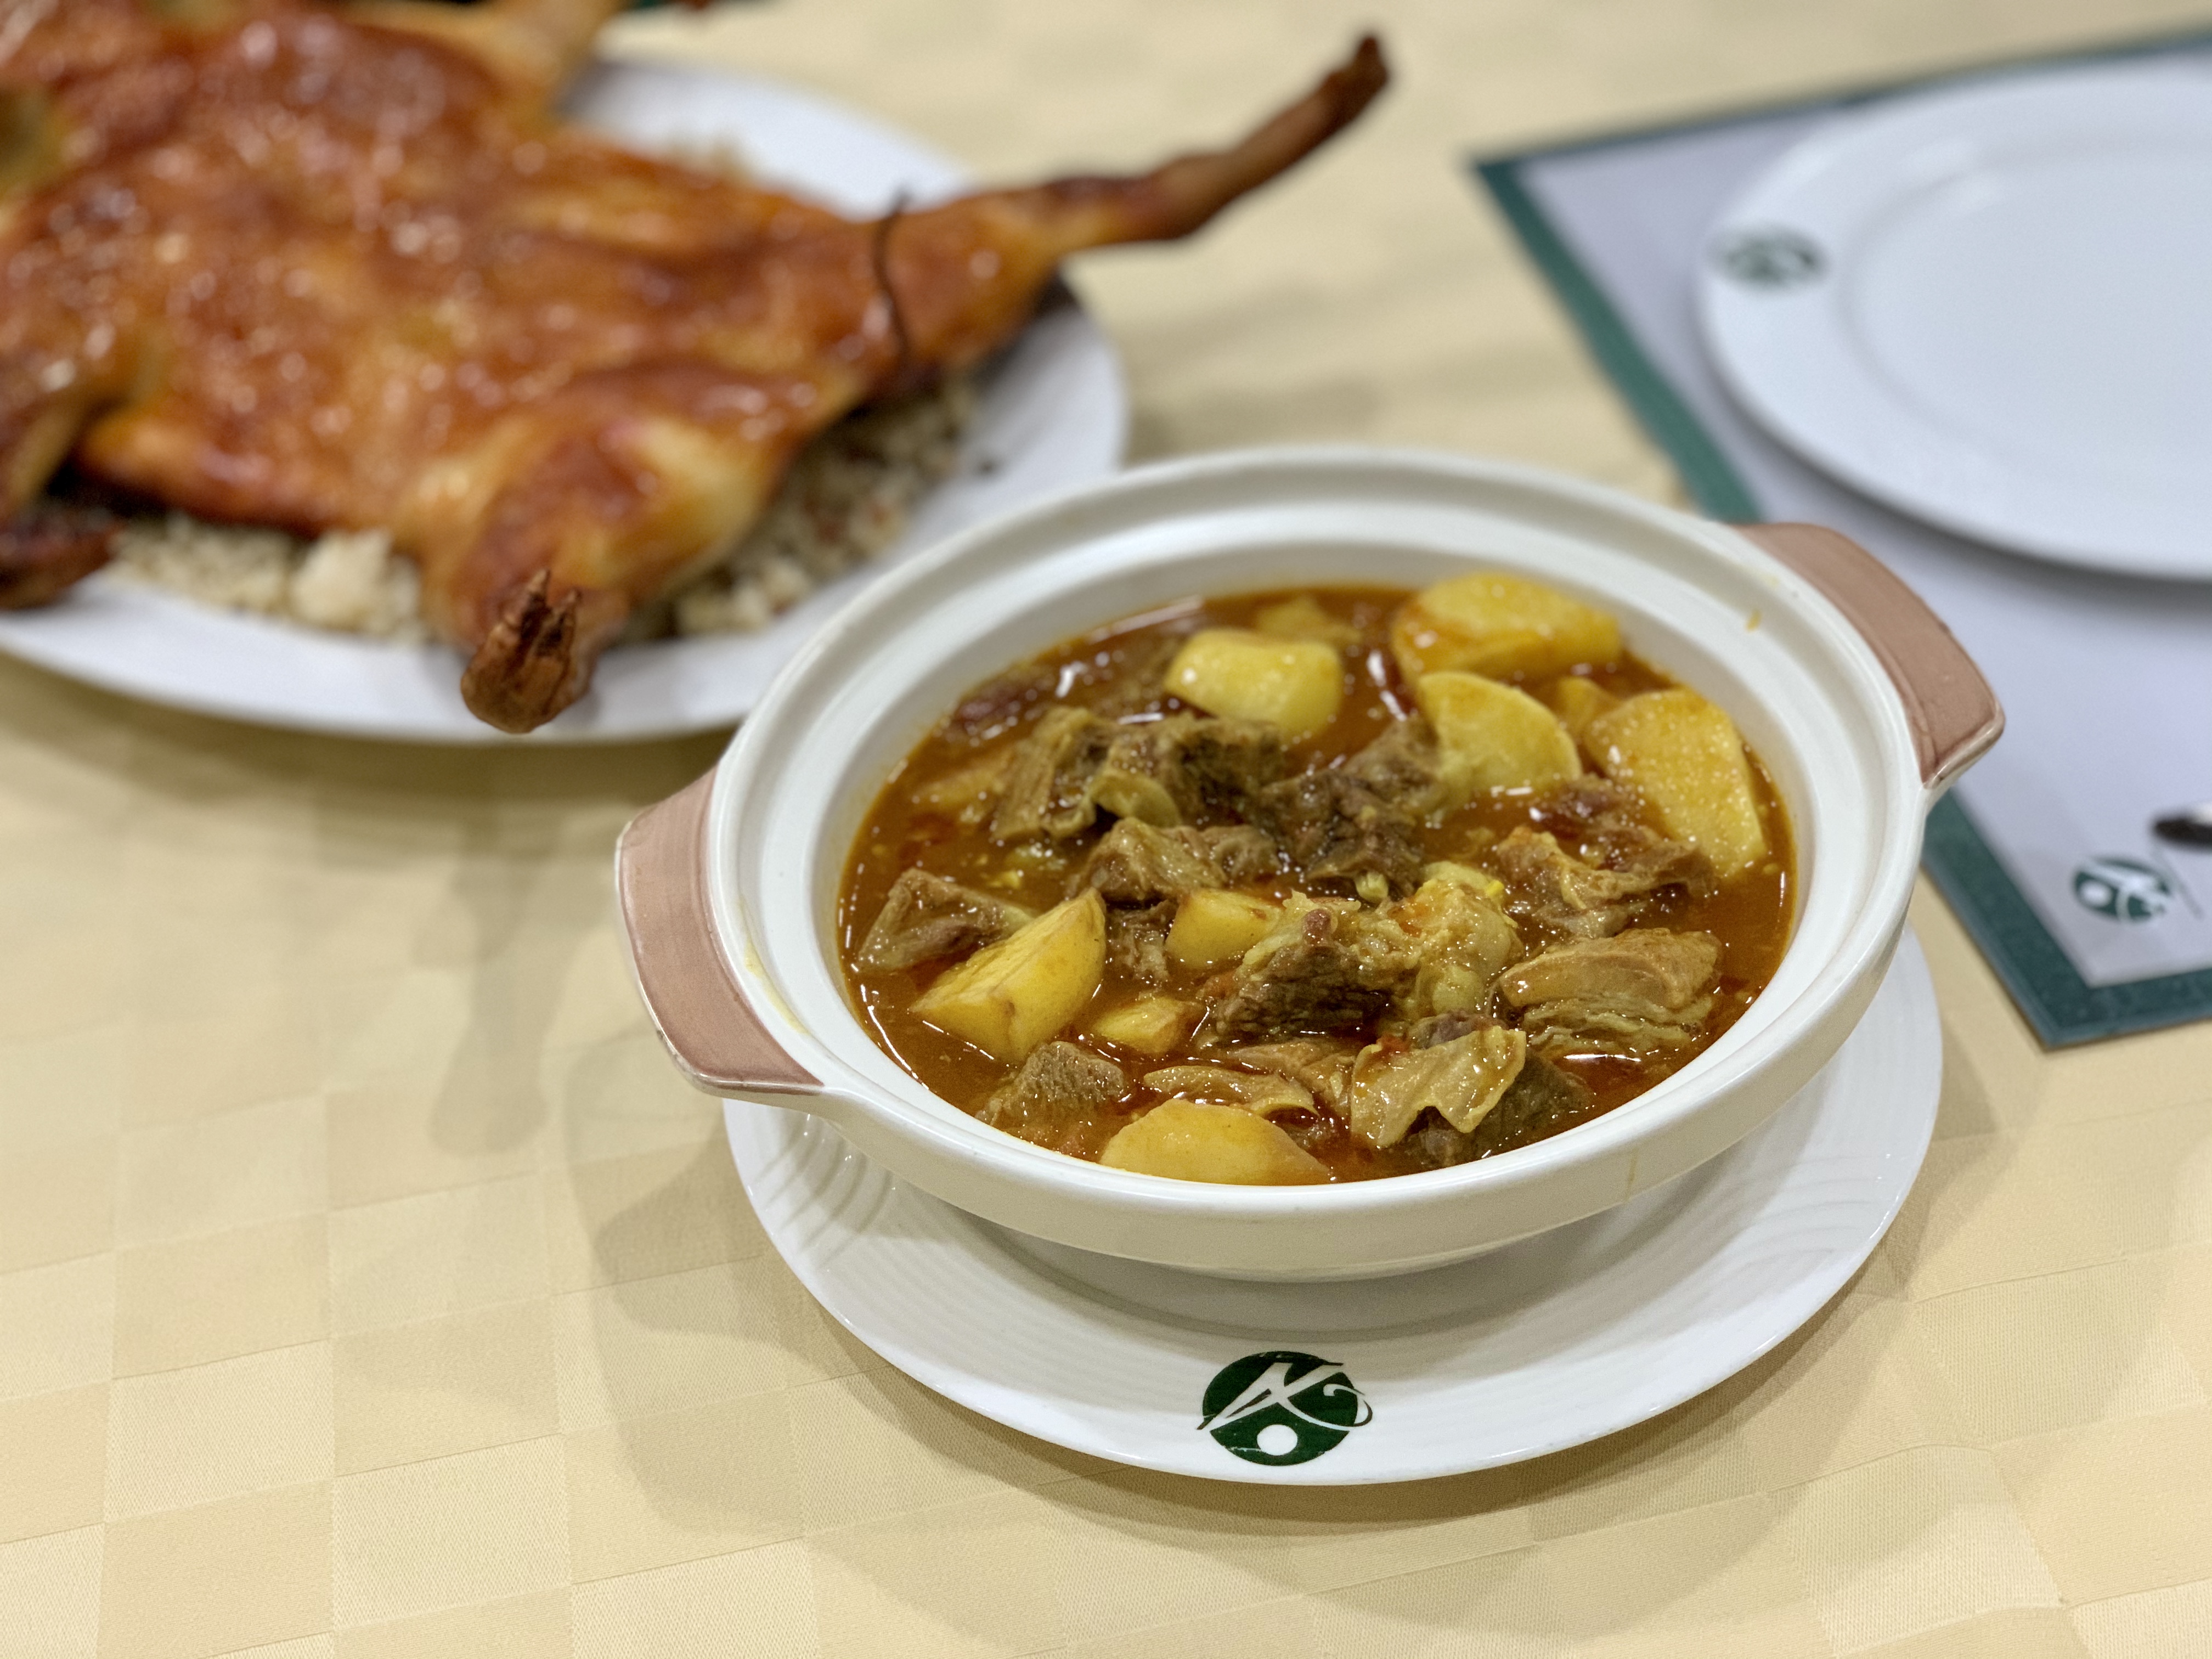 Ox curry and suckling pig in the background set in the table APOMAC Macau Lifestyle